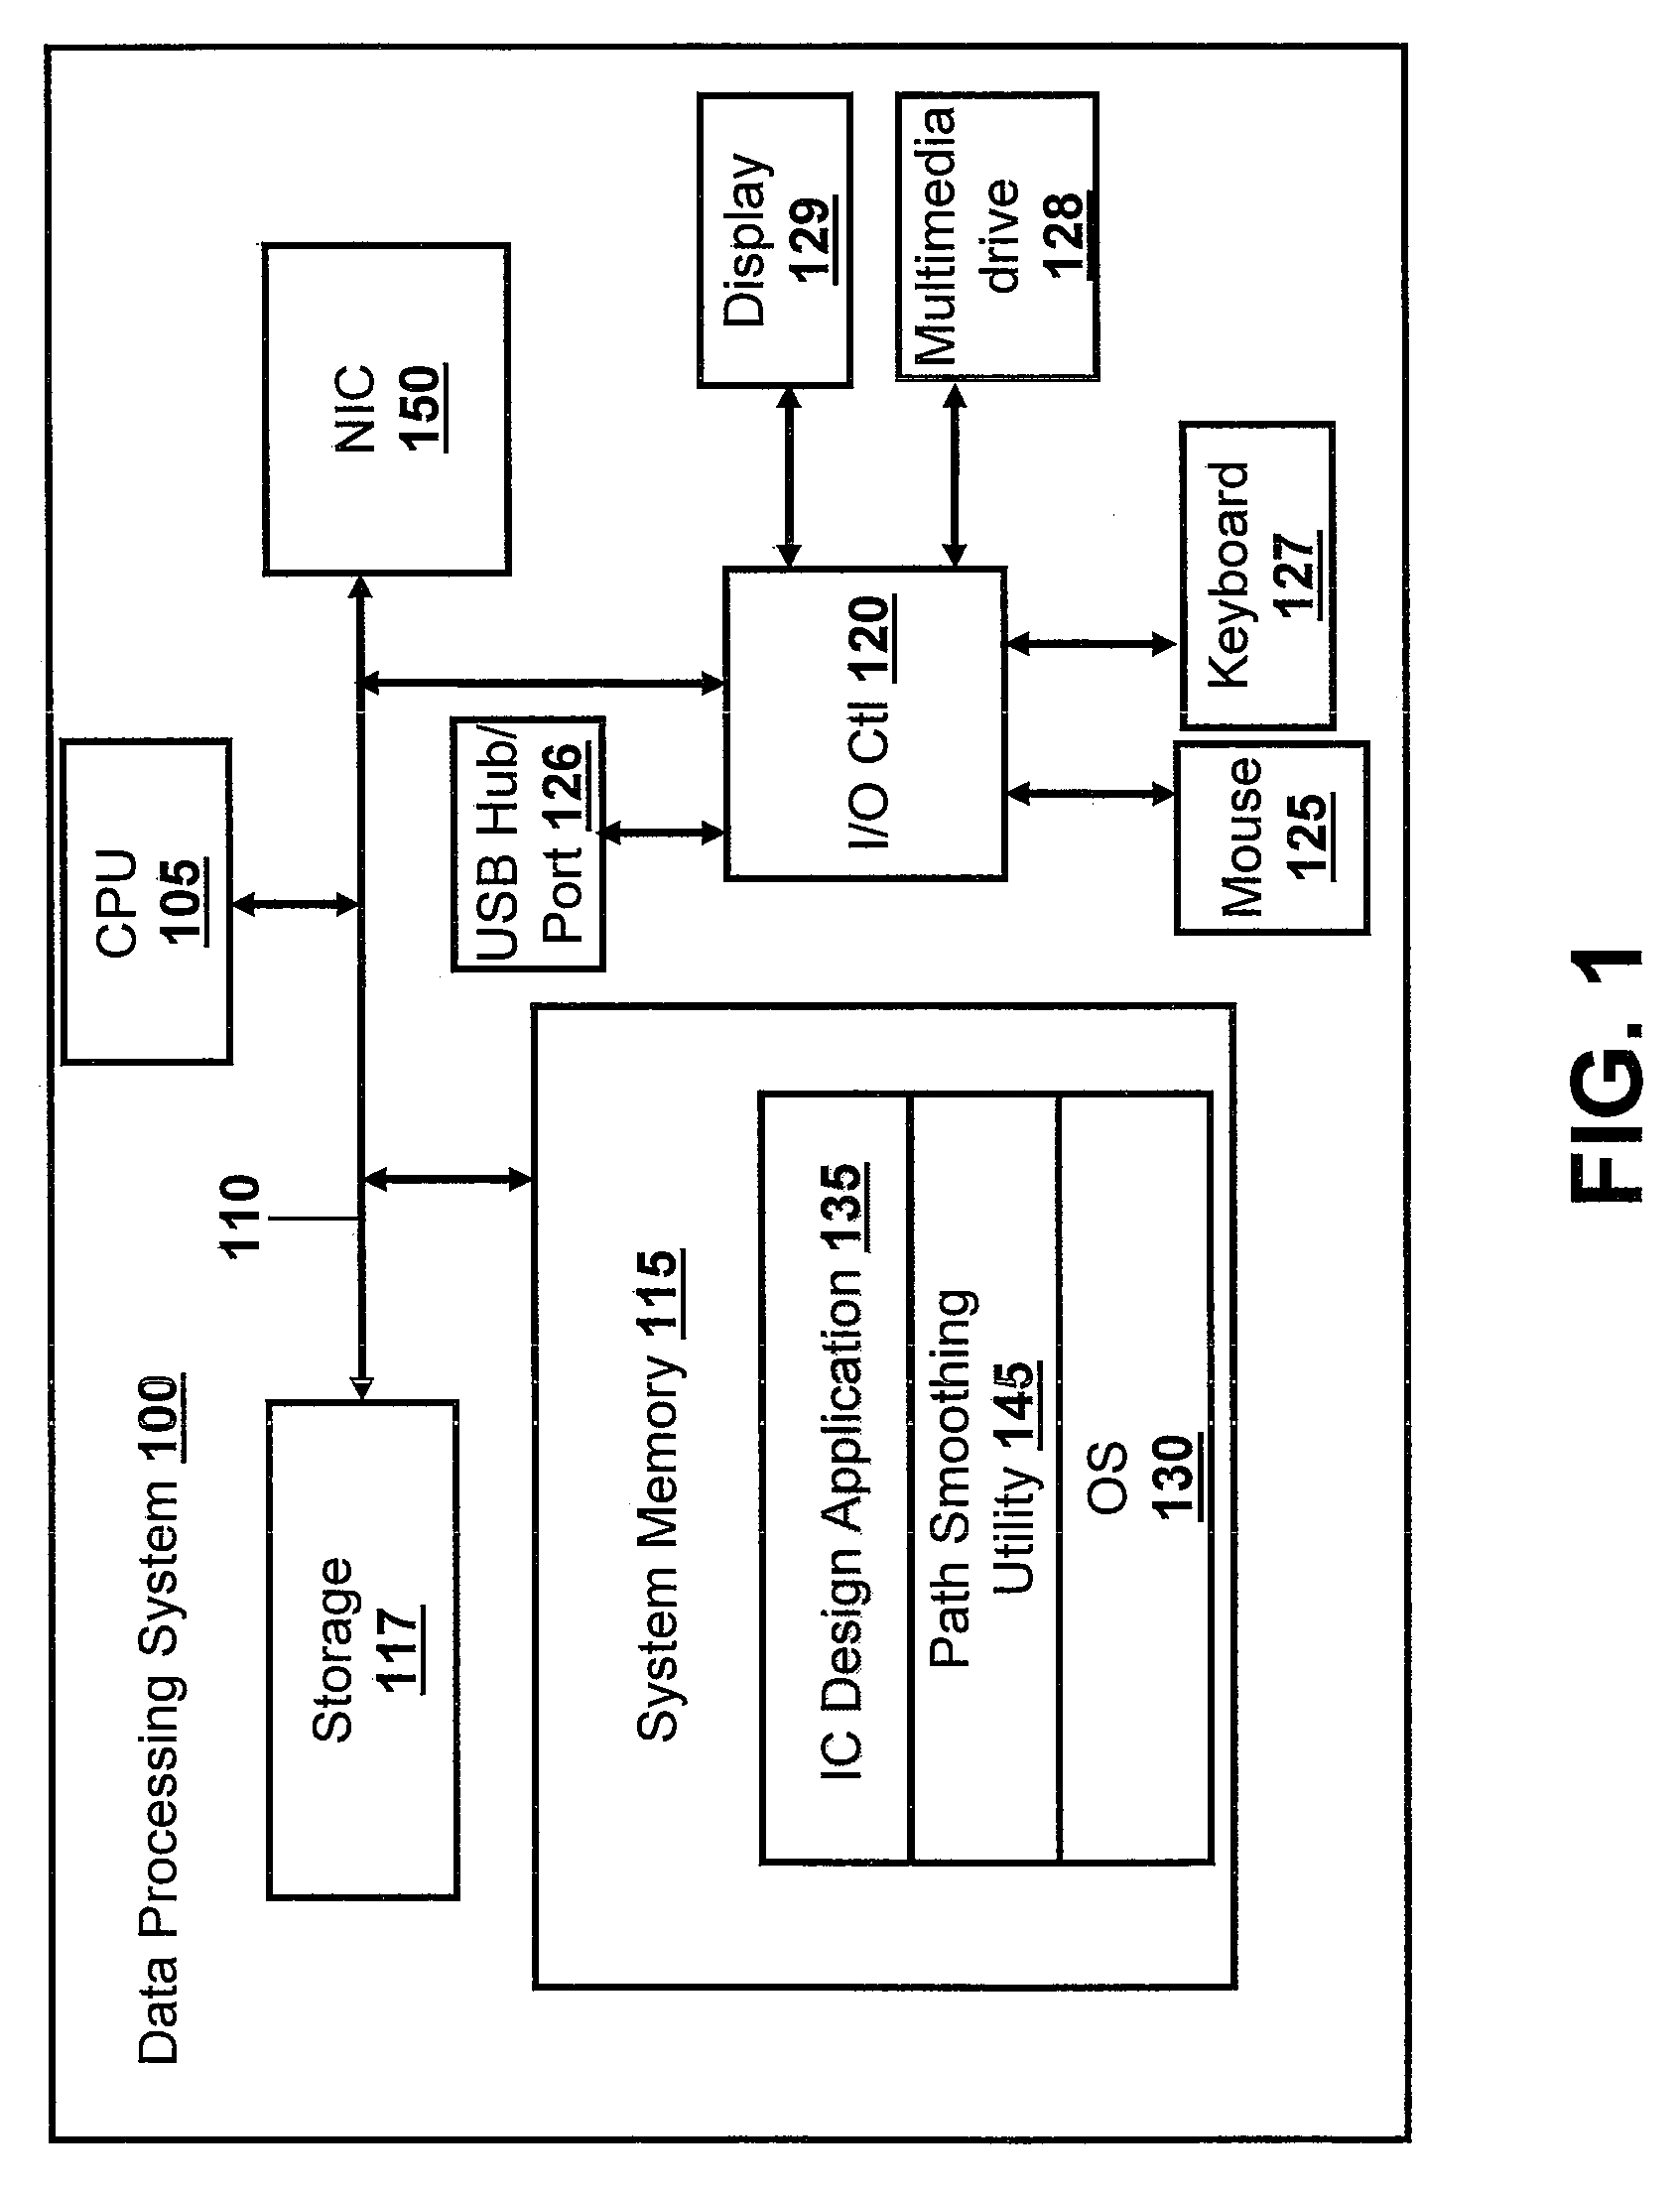 Method for Incremental, Timing-Driven, Physical-Synthesis Using Discrete Optimization